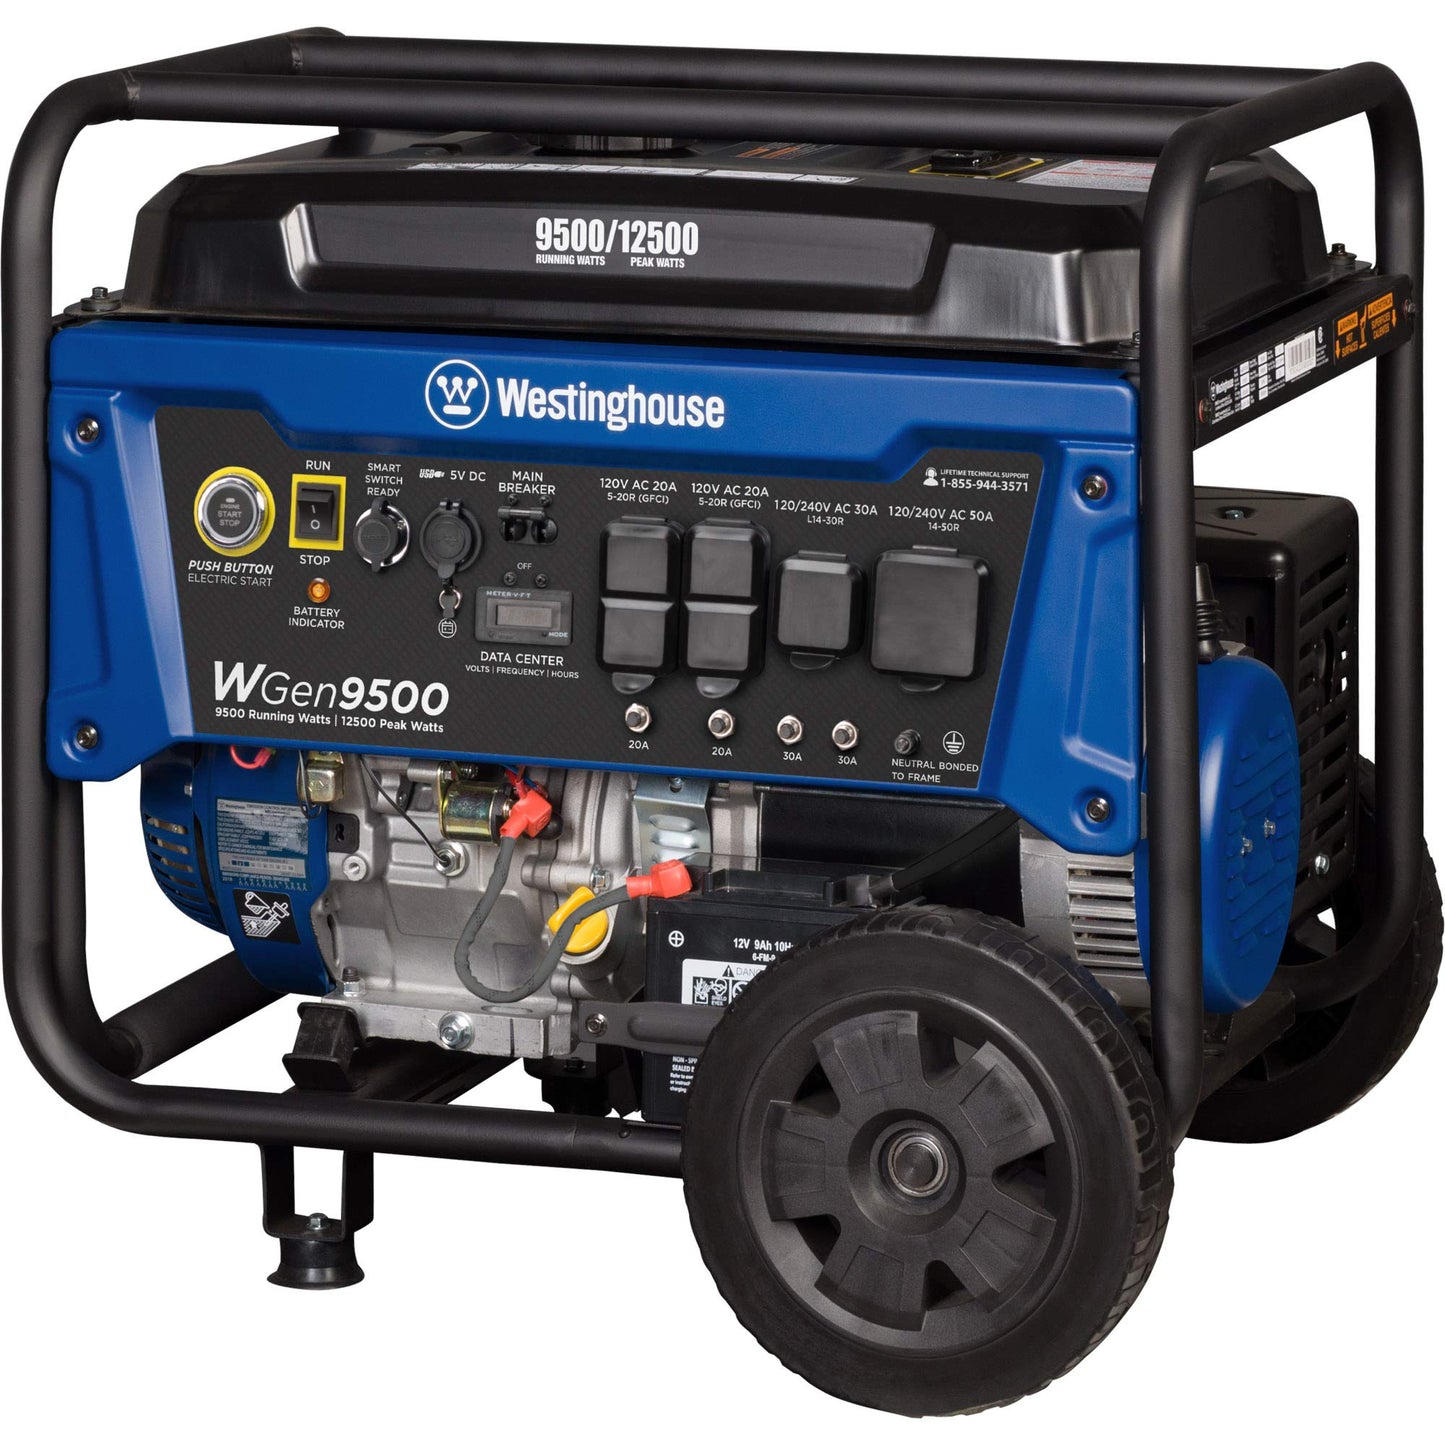 Westinghouse Outdoor Power Equipment 12500 Peak Watt Home Backup Portable Generator with Remote Electric Start